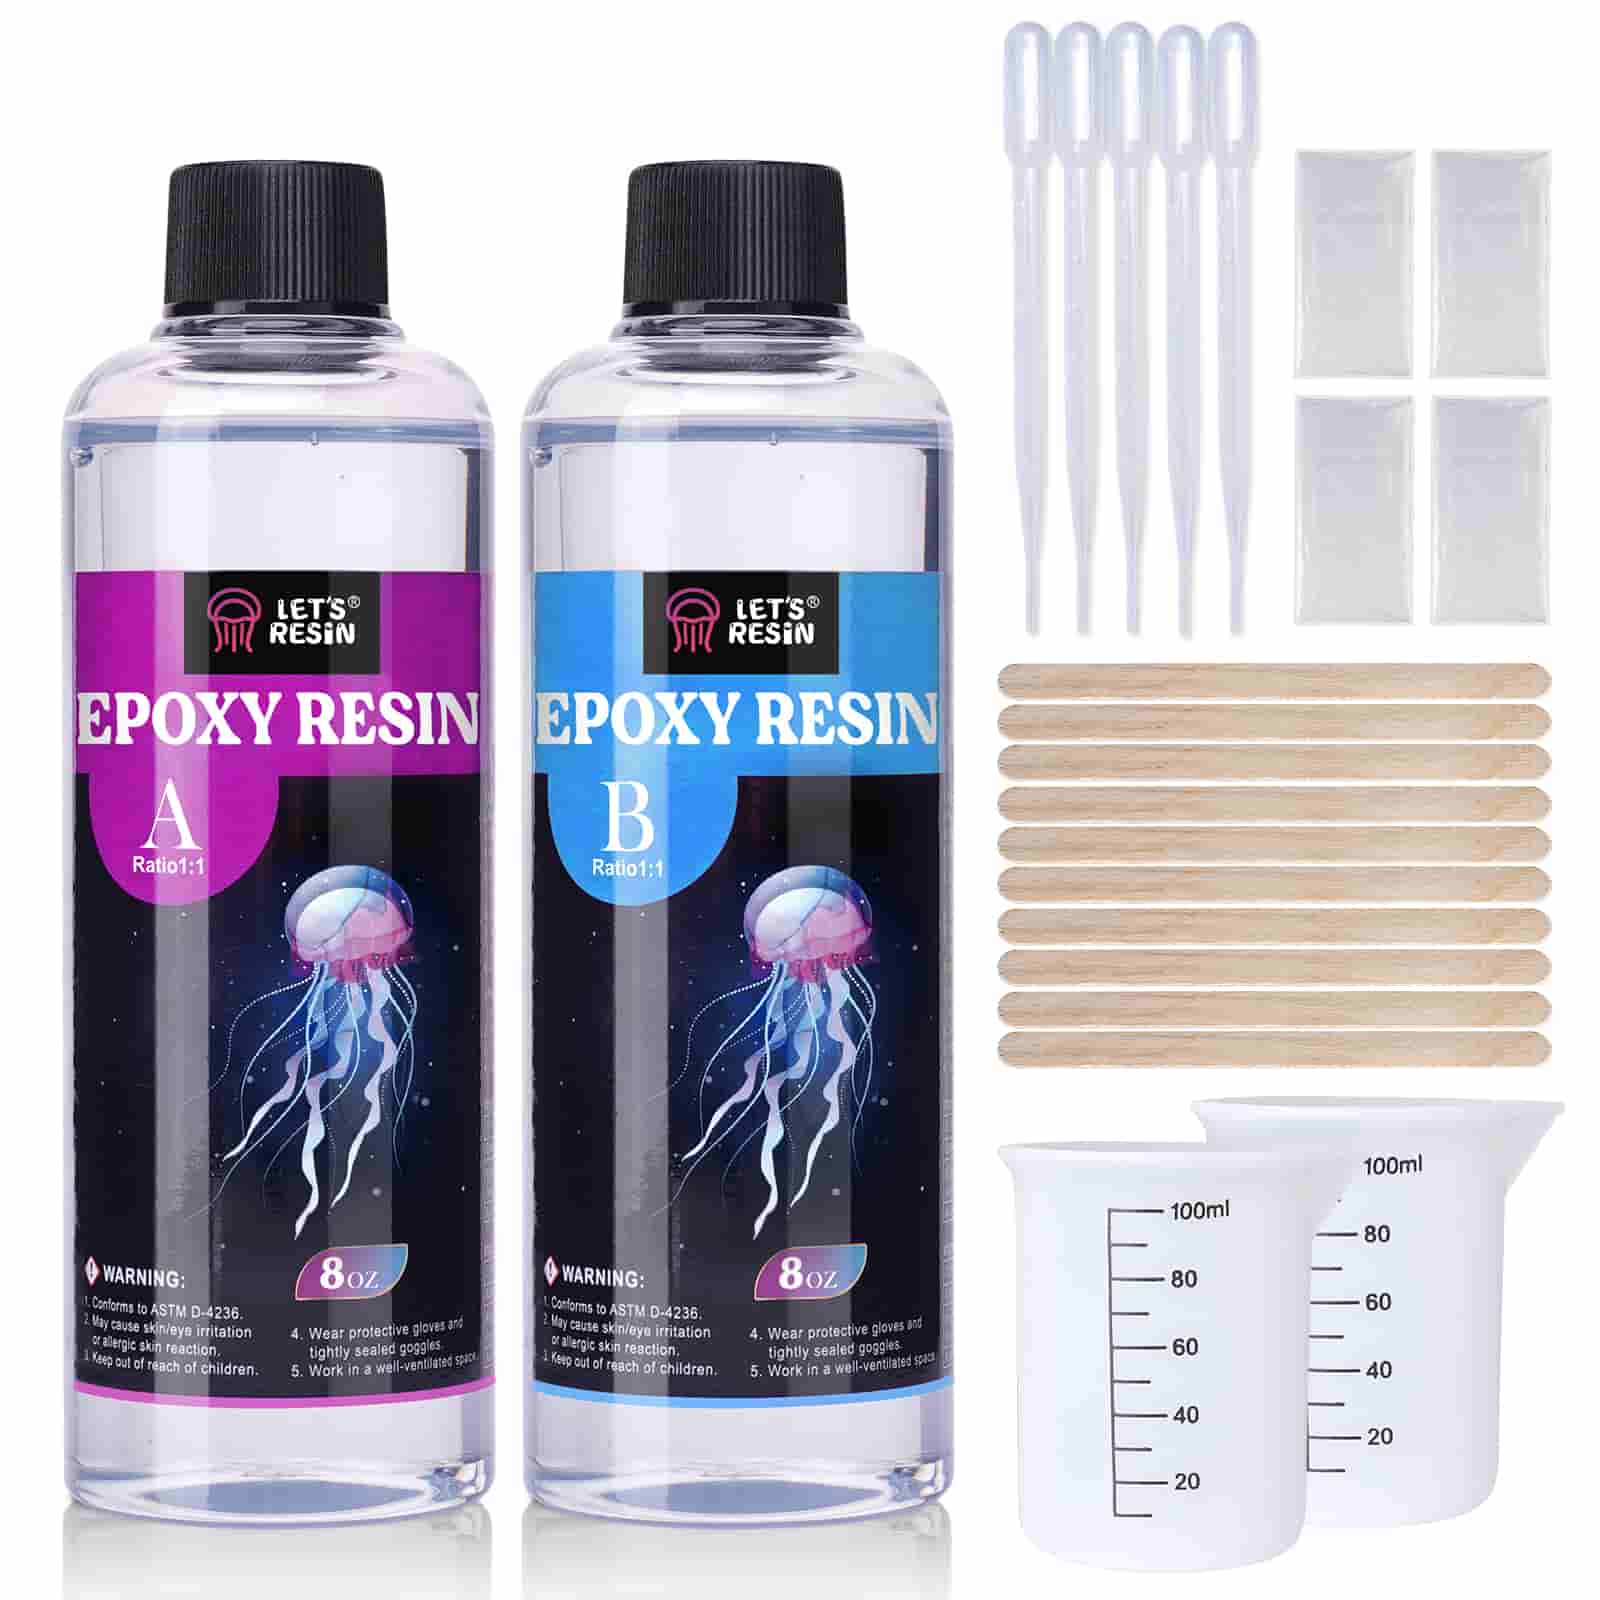 Let's Resin 16oz Clear Epoxy Resin Kit, Bubbles Free Casting Resin for Art Crafts, Jewelry Making